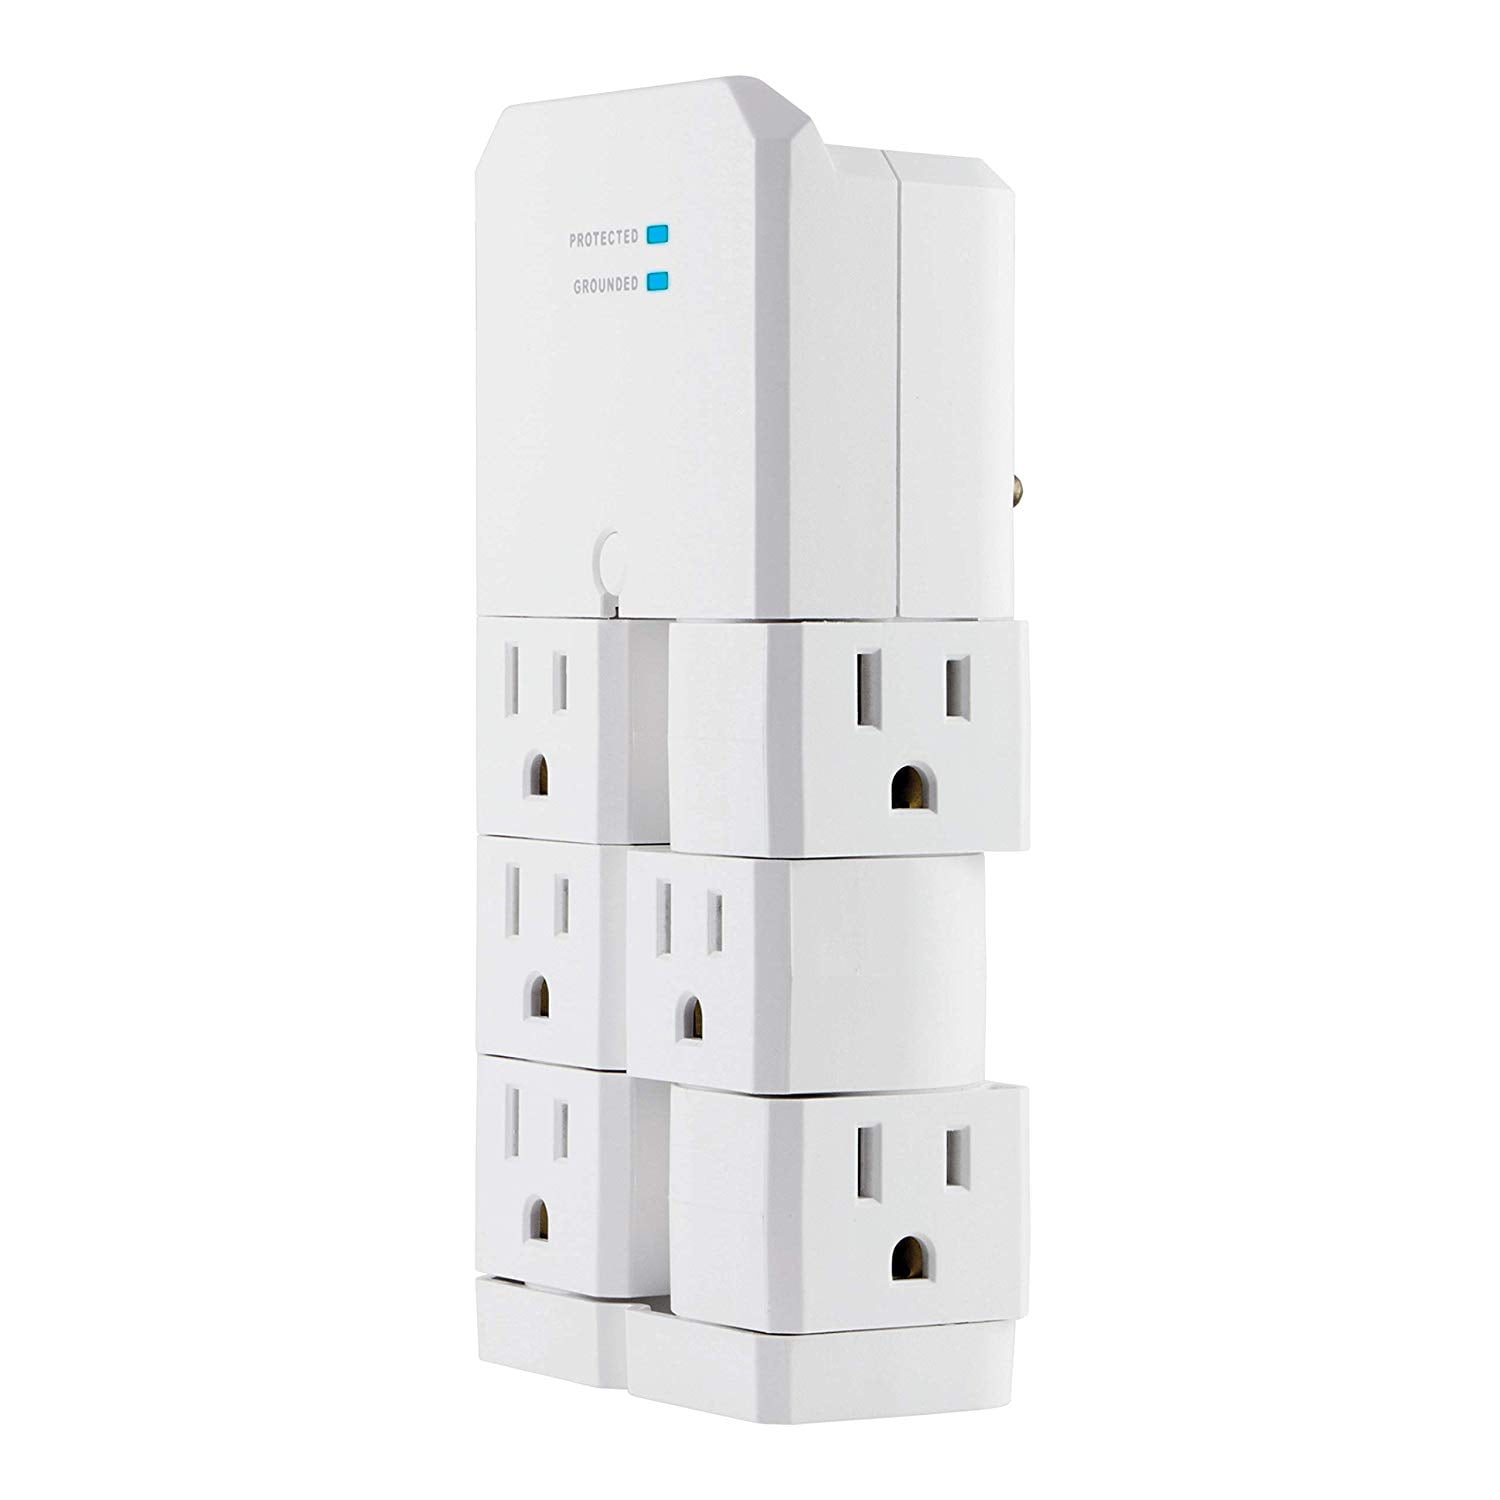 6 Outlet Wall Tap Adapter Swivel 2500 watt Ac Surge Protector Grounded Electricl 